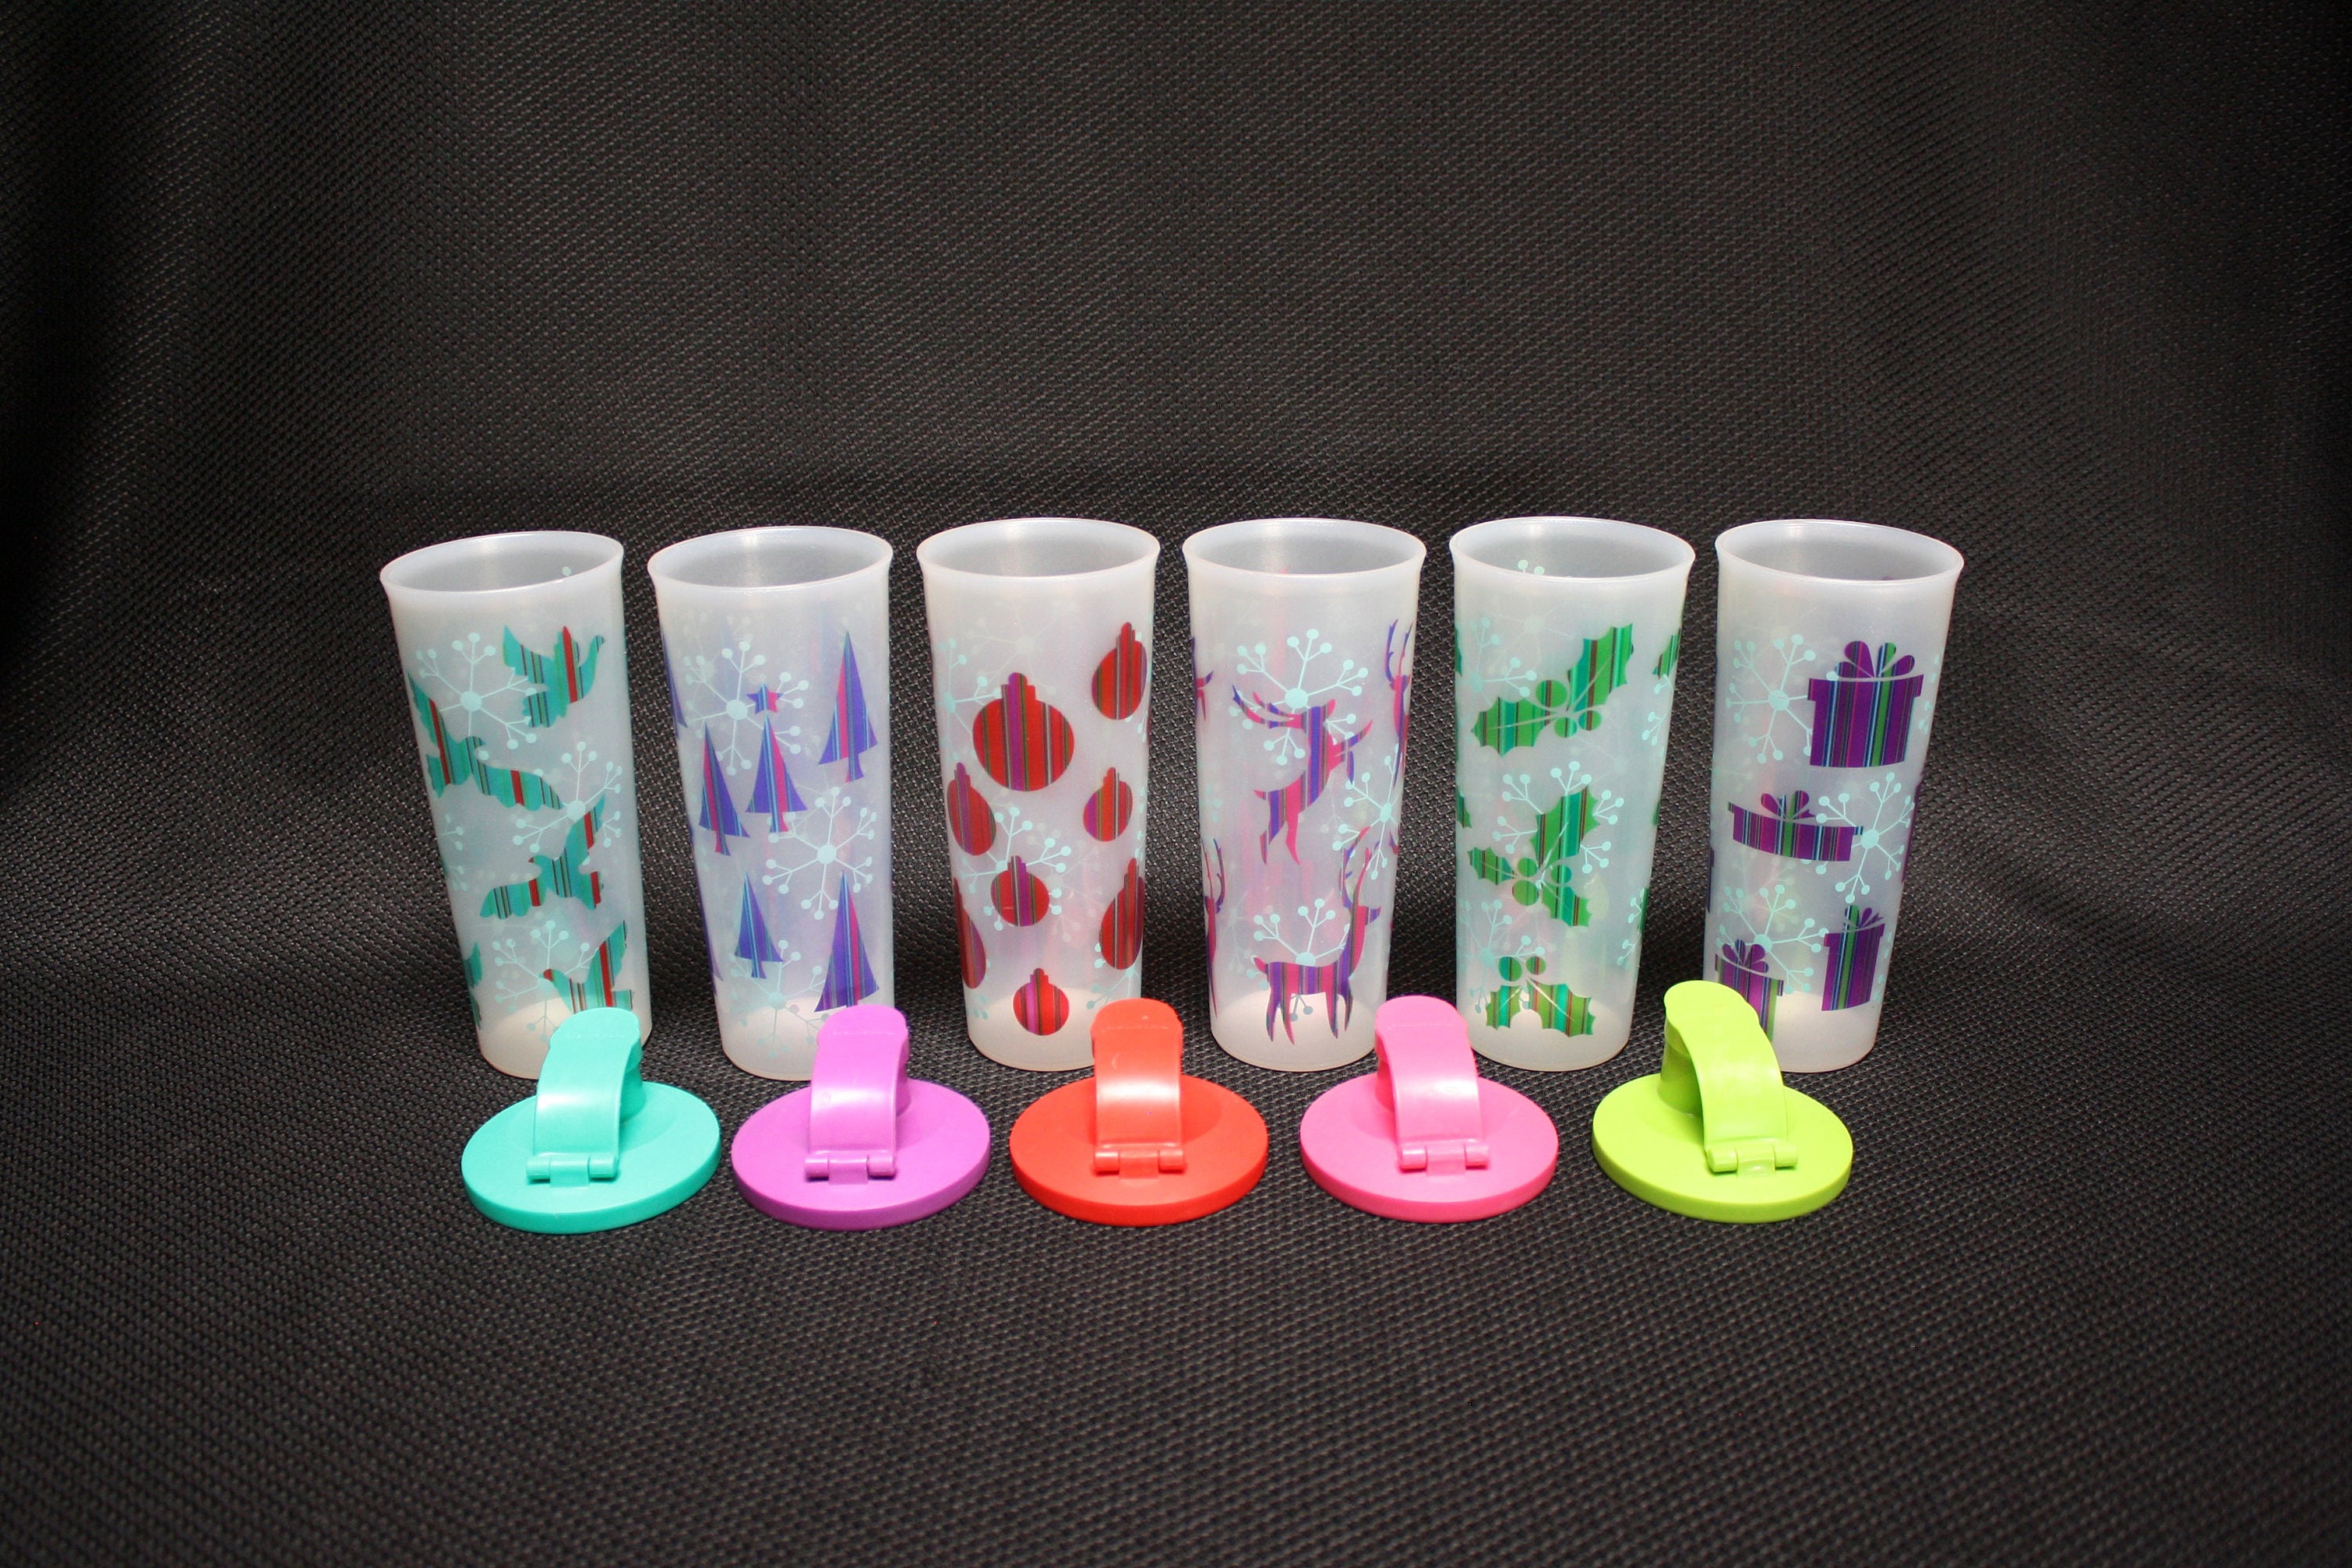 Set of 3 Holiday Tupperware Tumblers Chrismtas 16 oz #5107 With Lids